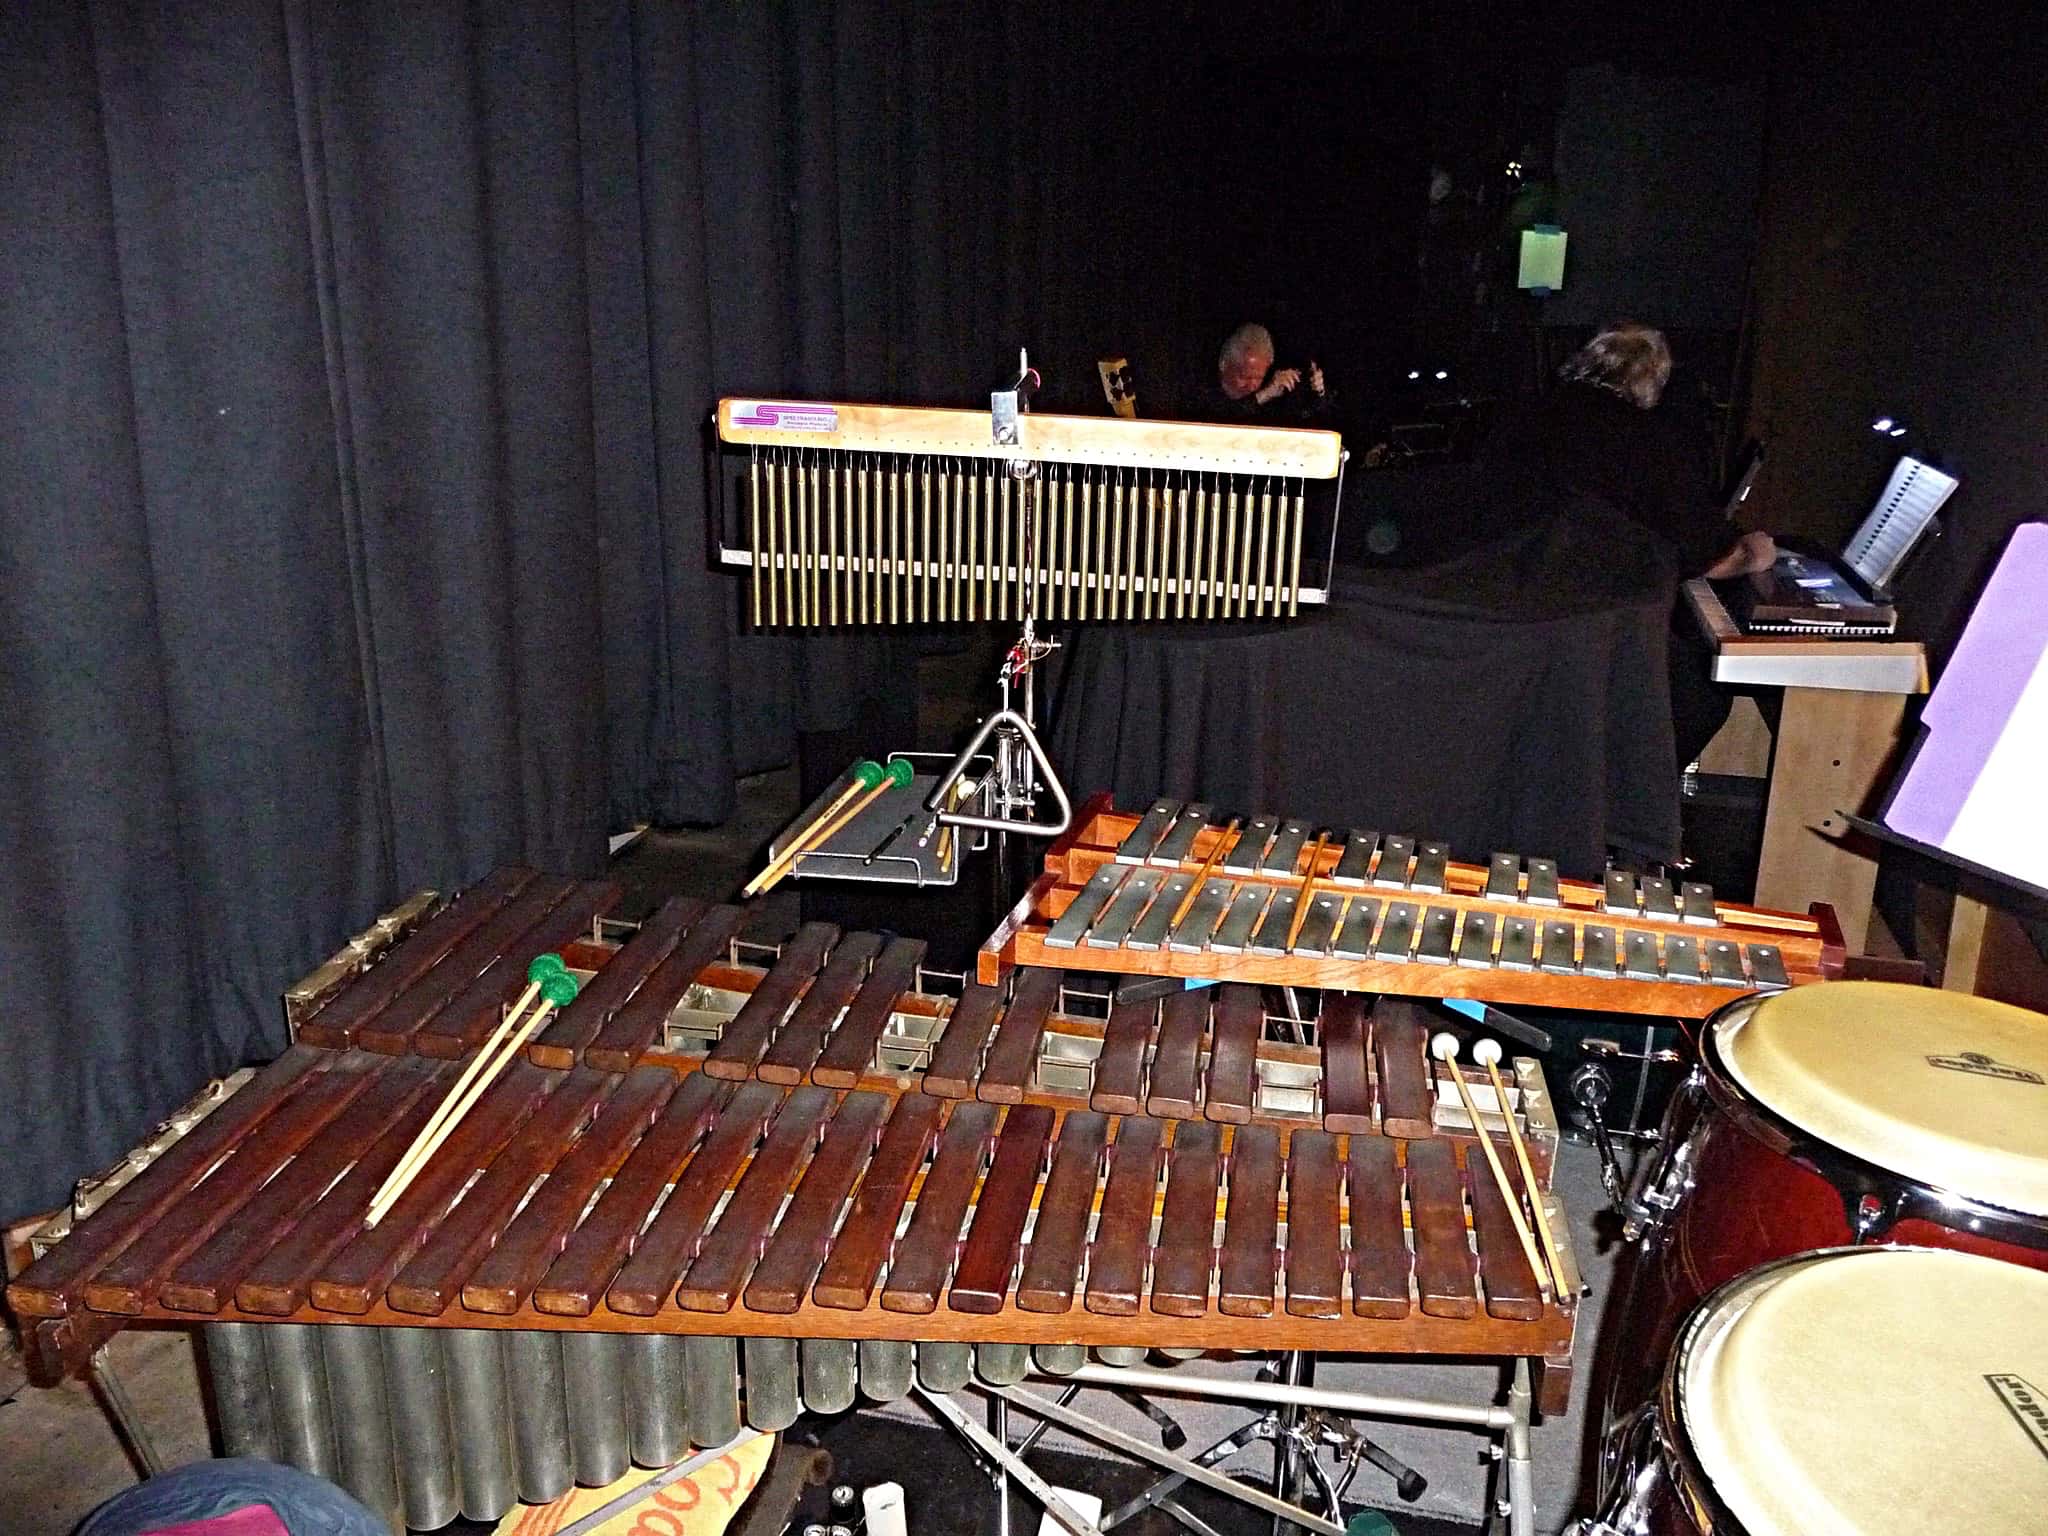 Debbie Minnichelli's percussion setup for Smokey Joe's Cafe at the Stage Door Repertory Theatre in Anaheim, California.